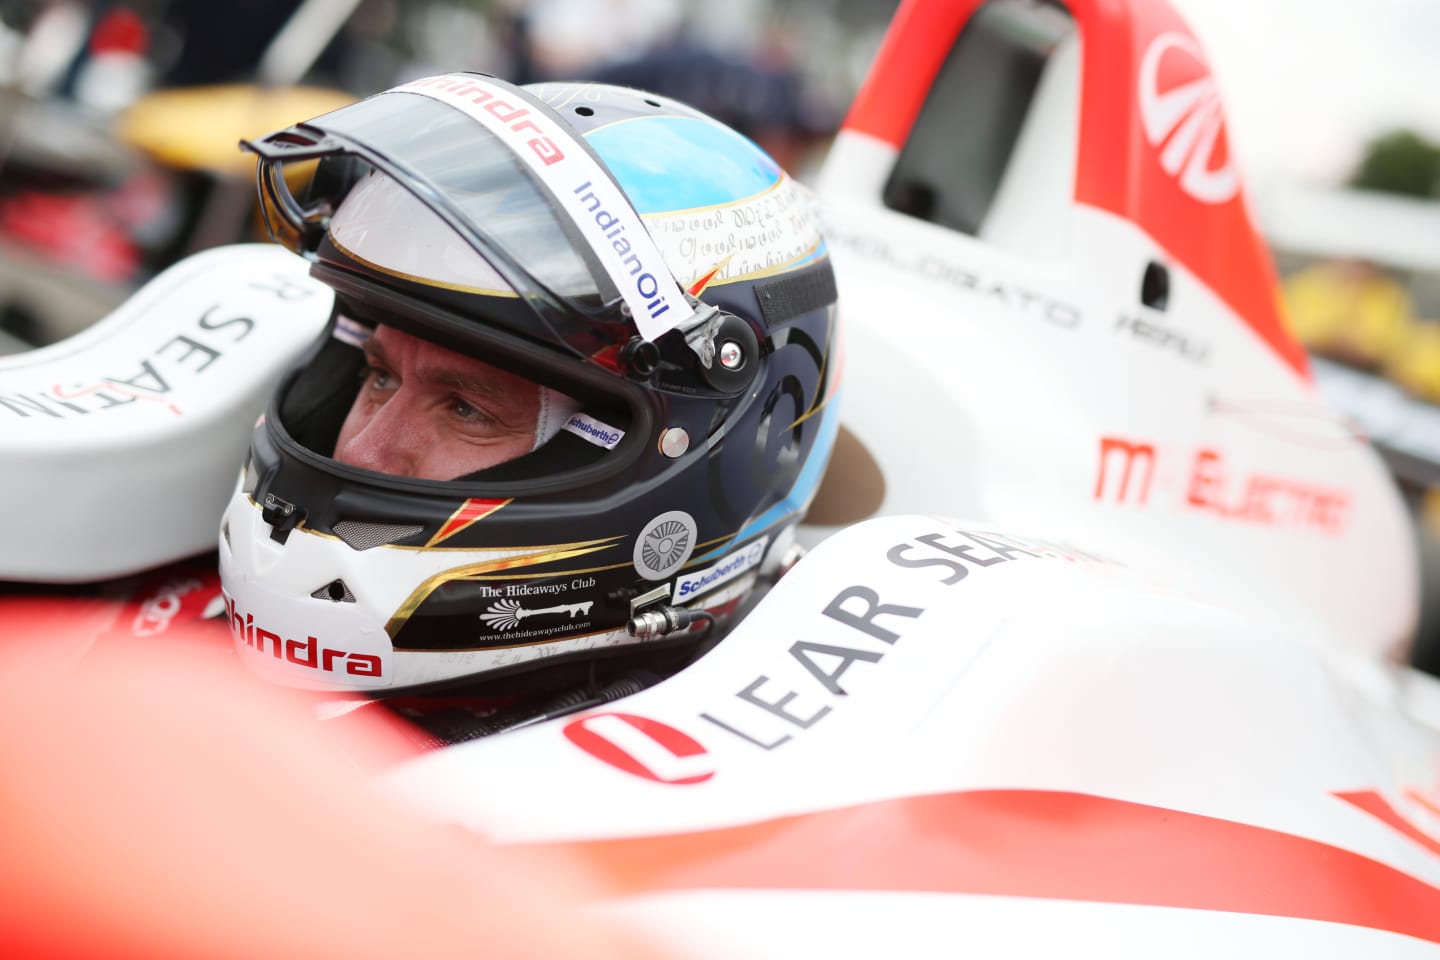 www.sutton-images.com Nick Heidfeld (GER) Mahindra at Goodwood Festival of Speed, Goodwood, England, 30 June - 2 July 2017. © Sutton Images